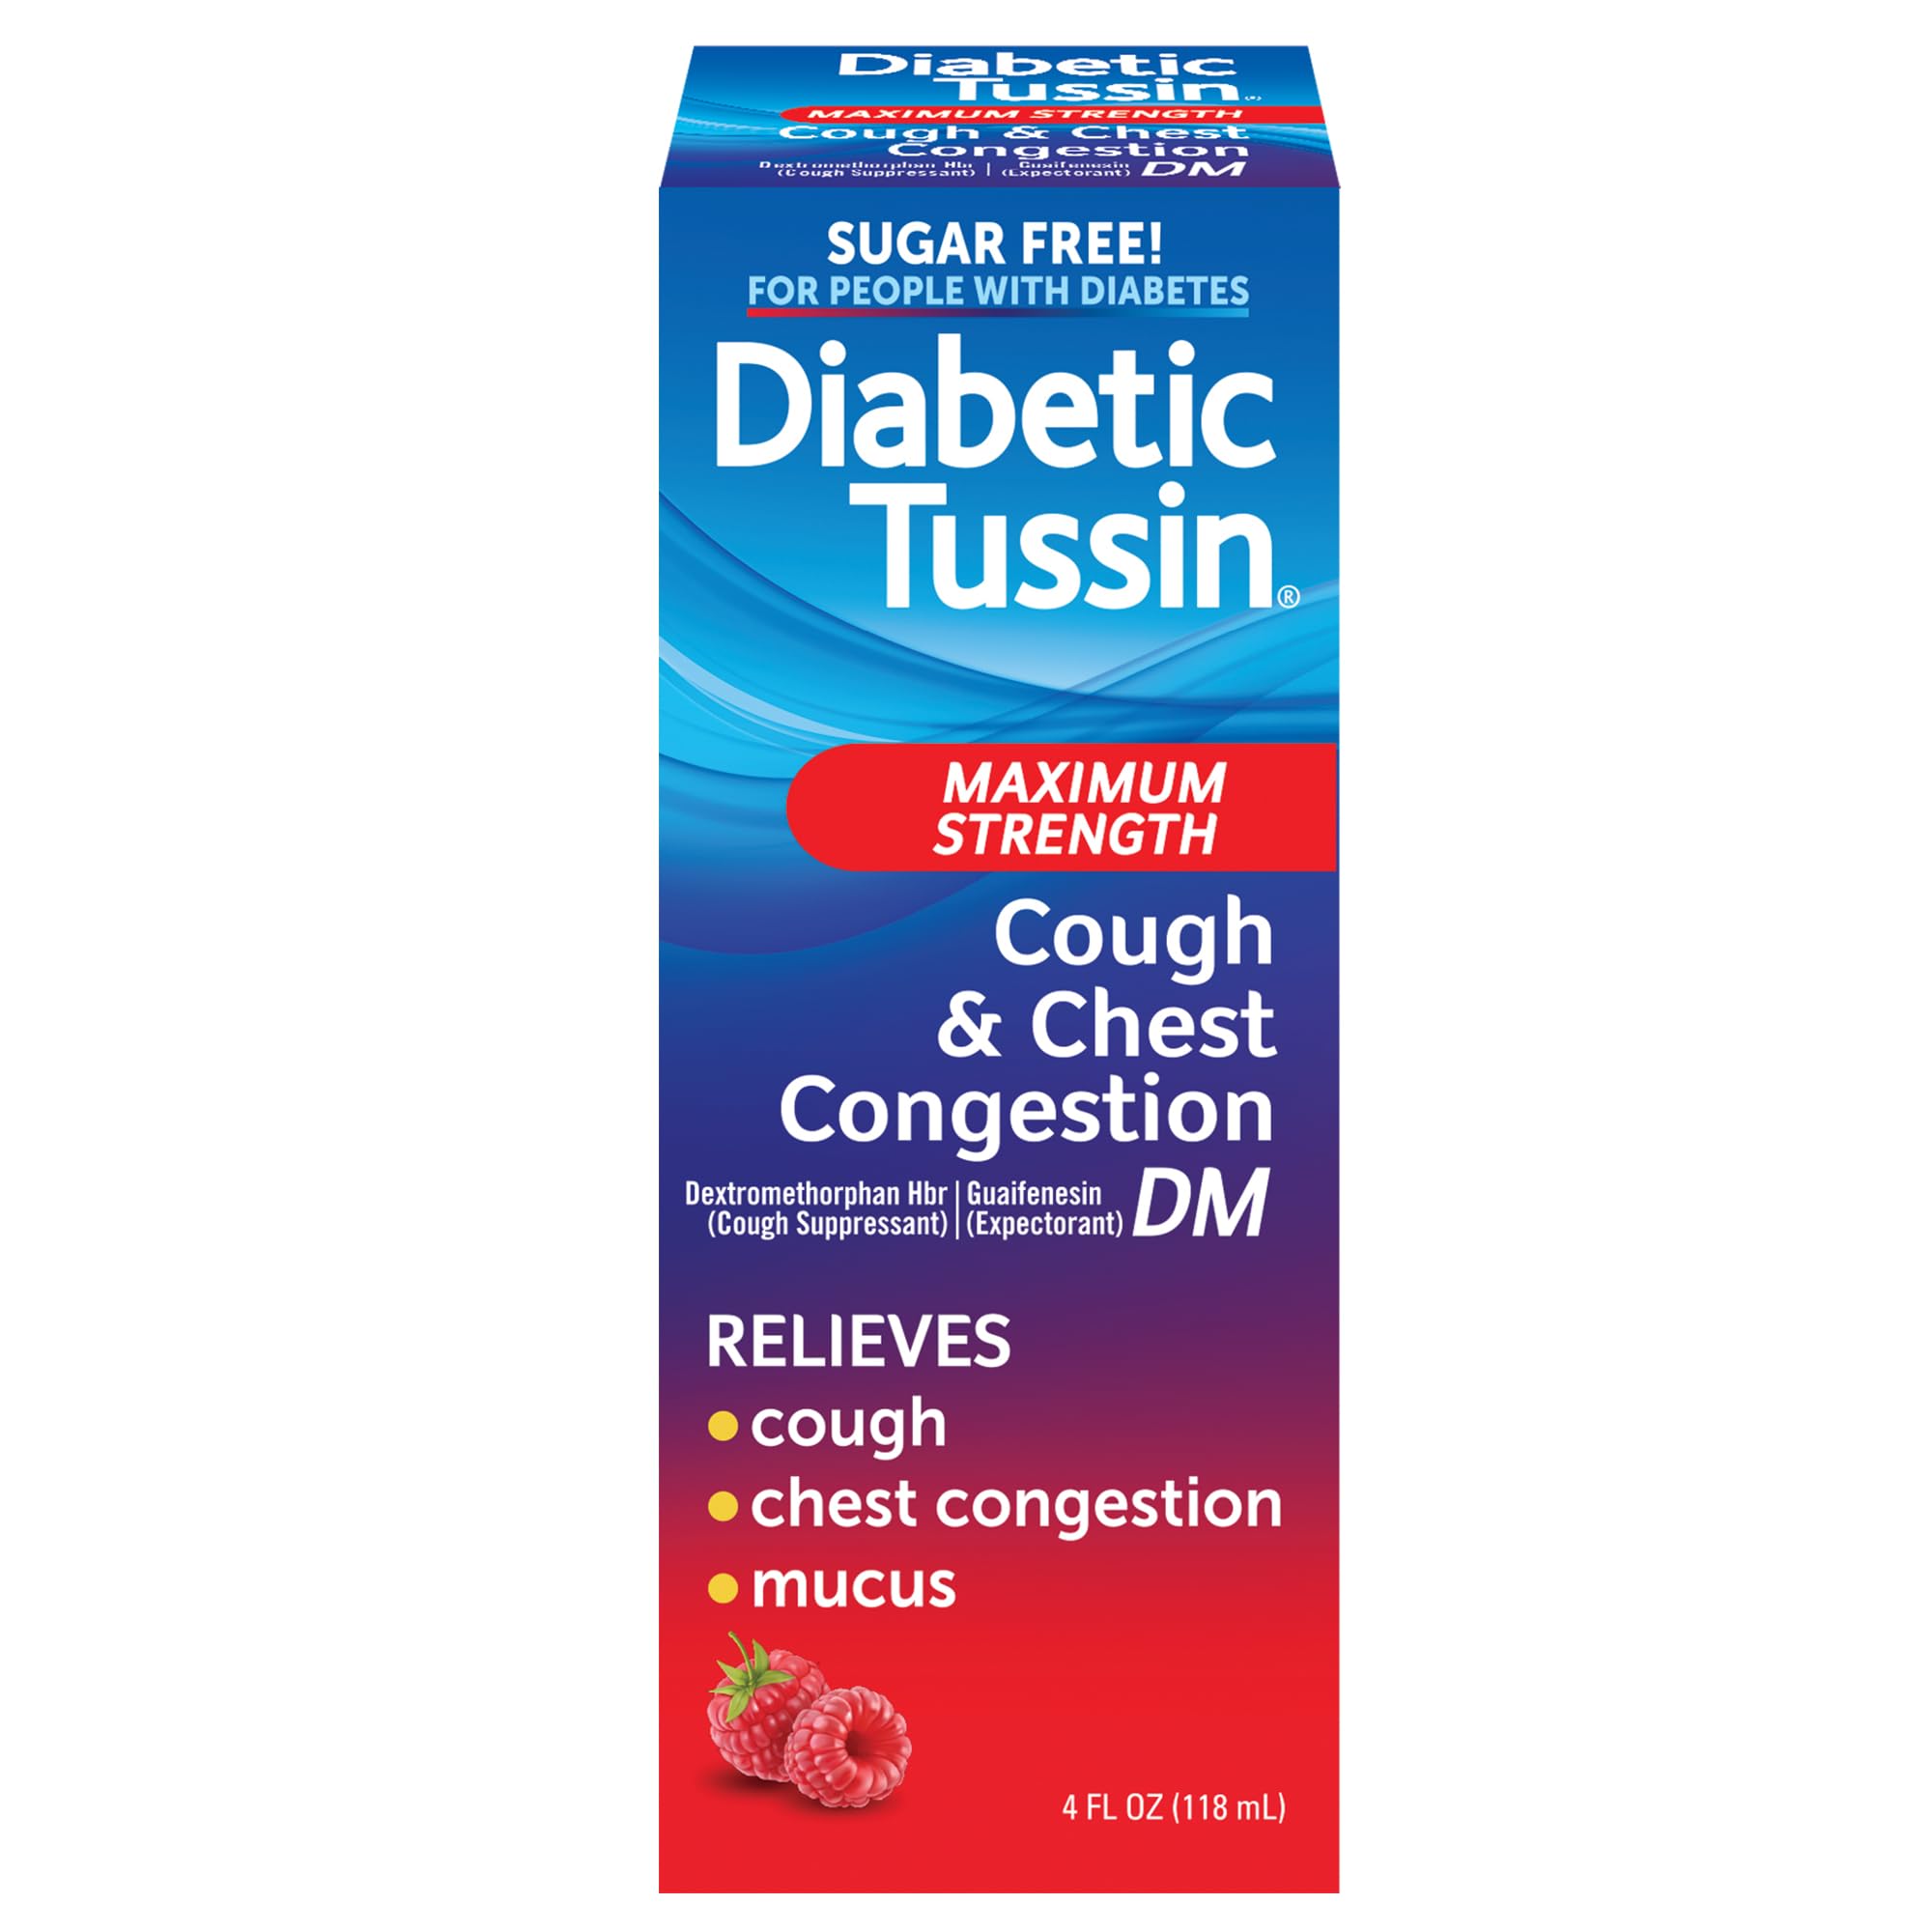 4-Fl Oz Diabetic Tussin DM Maximum Strength Cough and Chest Congestion Relief Liquid Cough Syrup (Berry) $3.83 w/ S&S + Free Shipping w/ Prime or on $35+